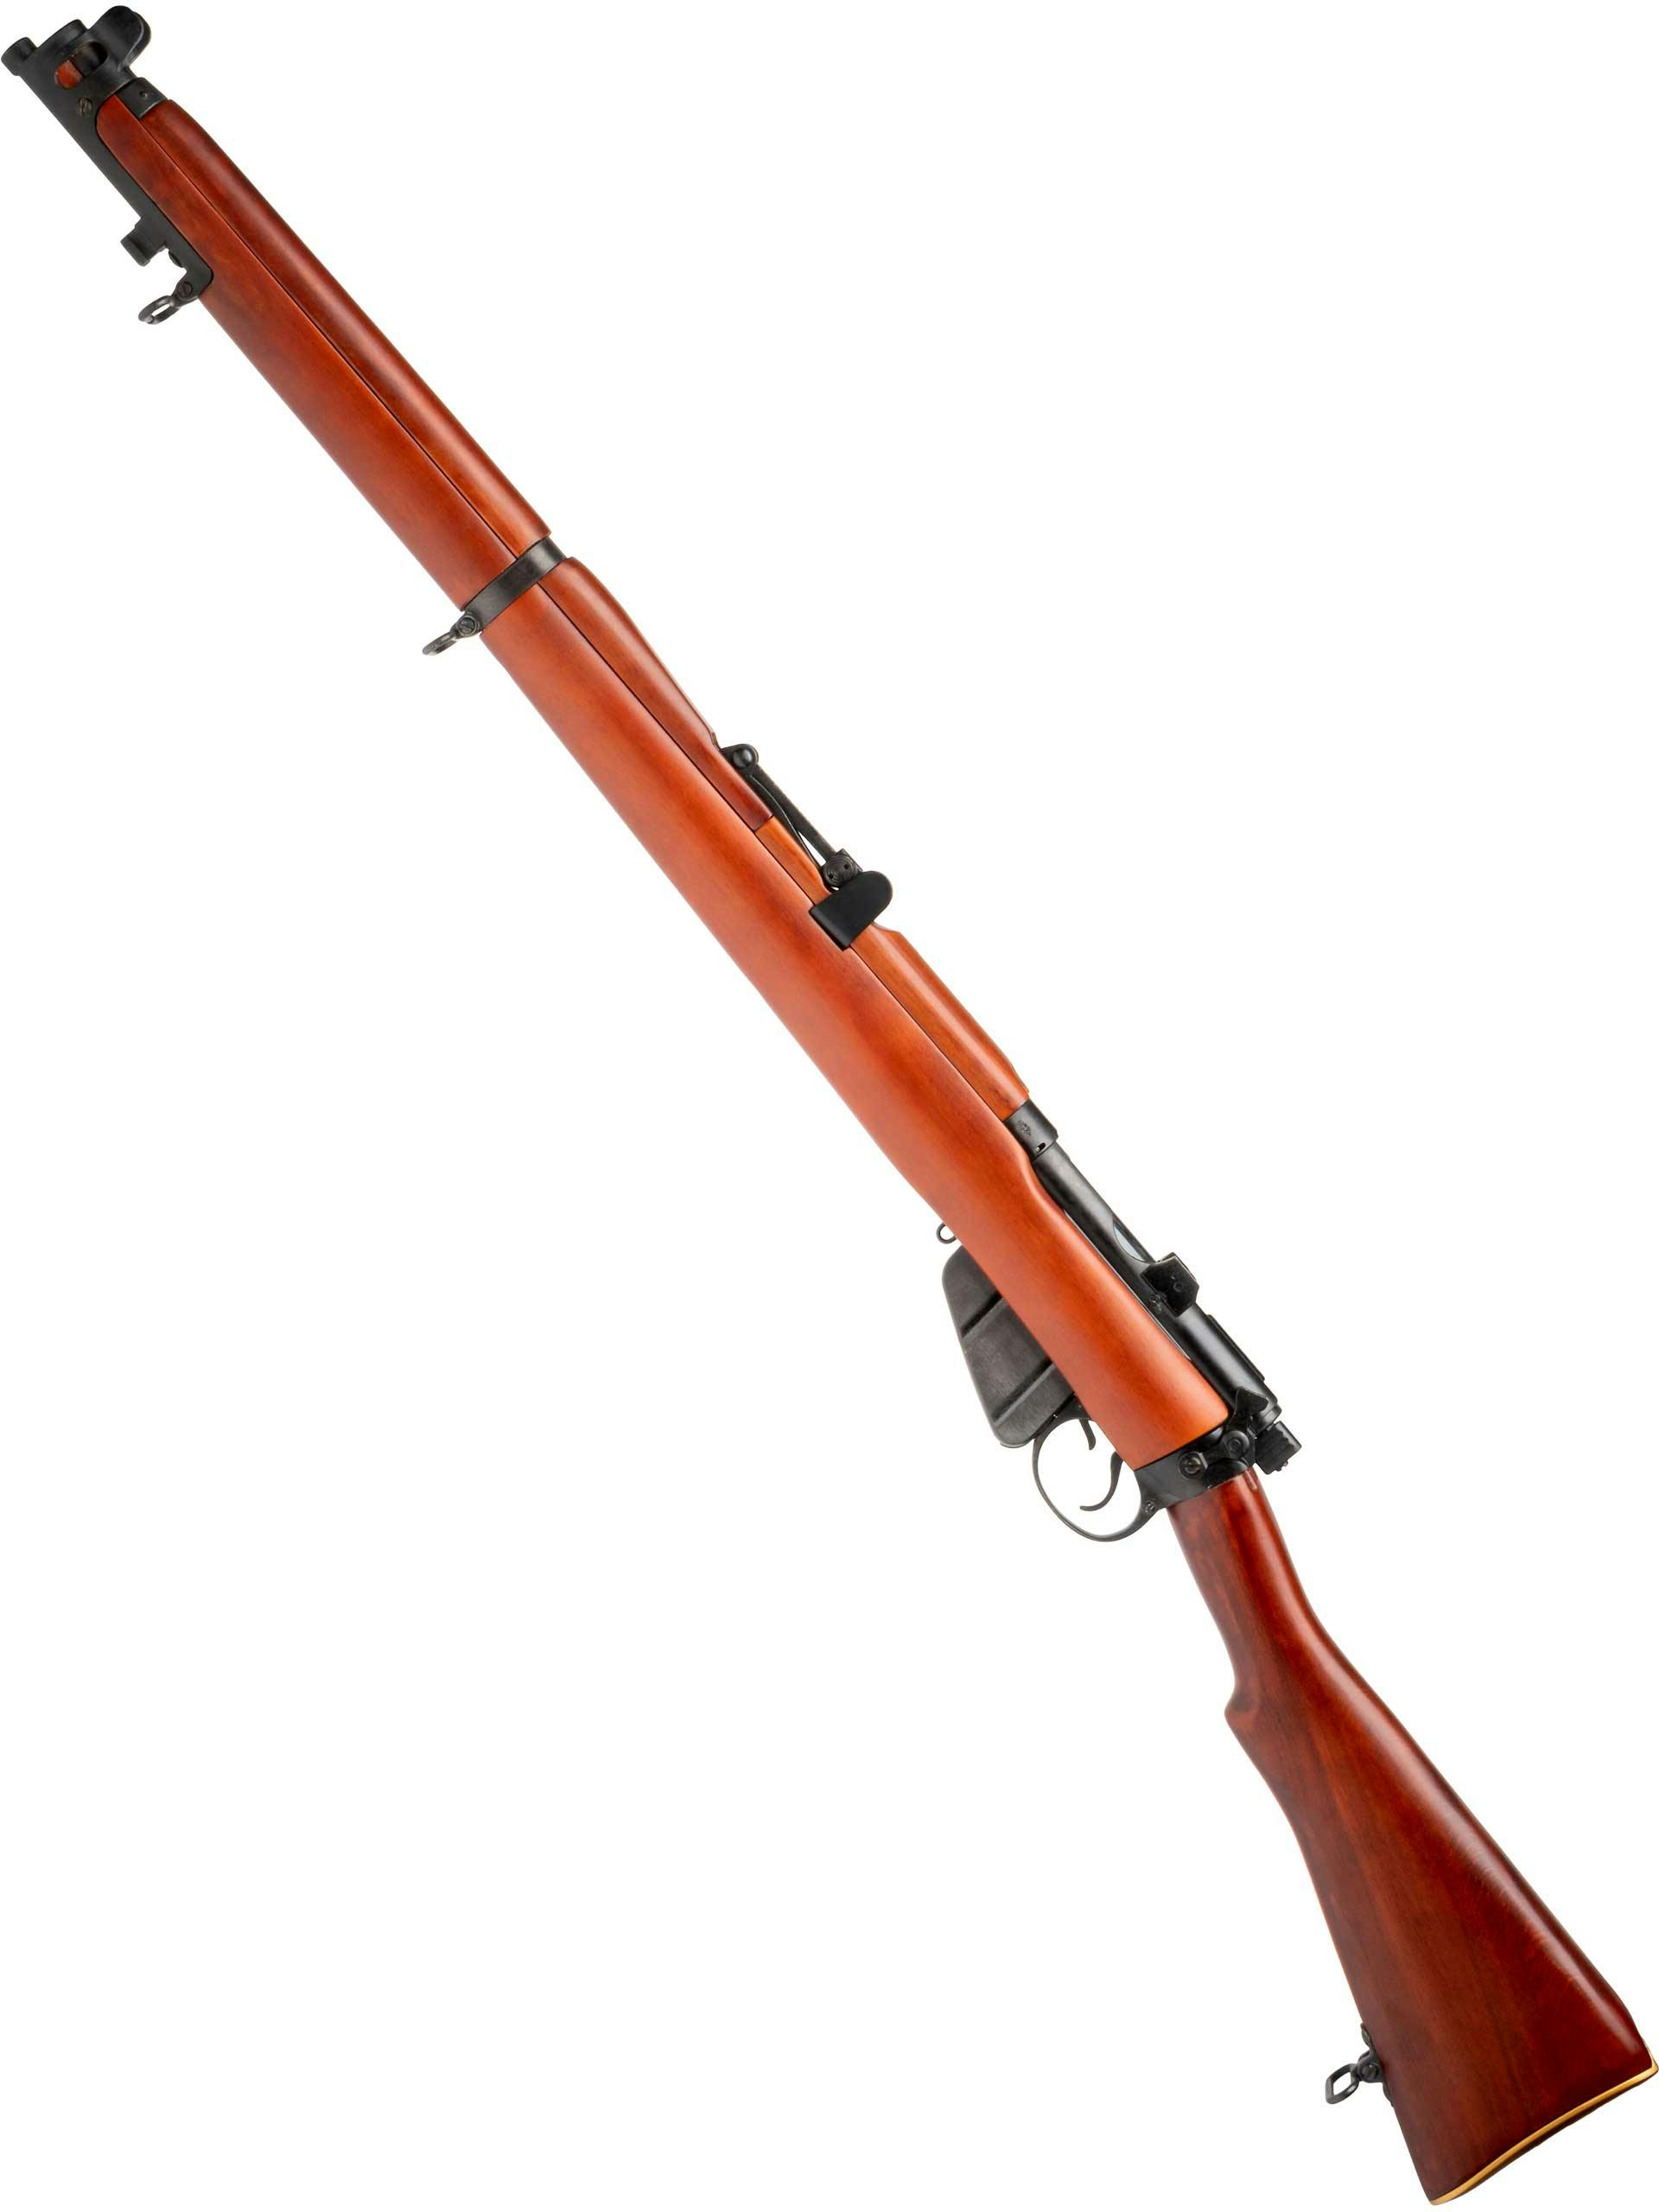 Lee-Enfield SMLE No.1 MKIII Rifle de muelle S&T- Madera Real y Metal -  Quimera Airsoft